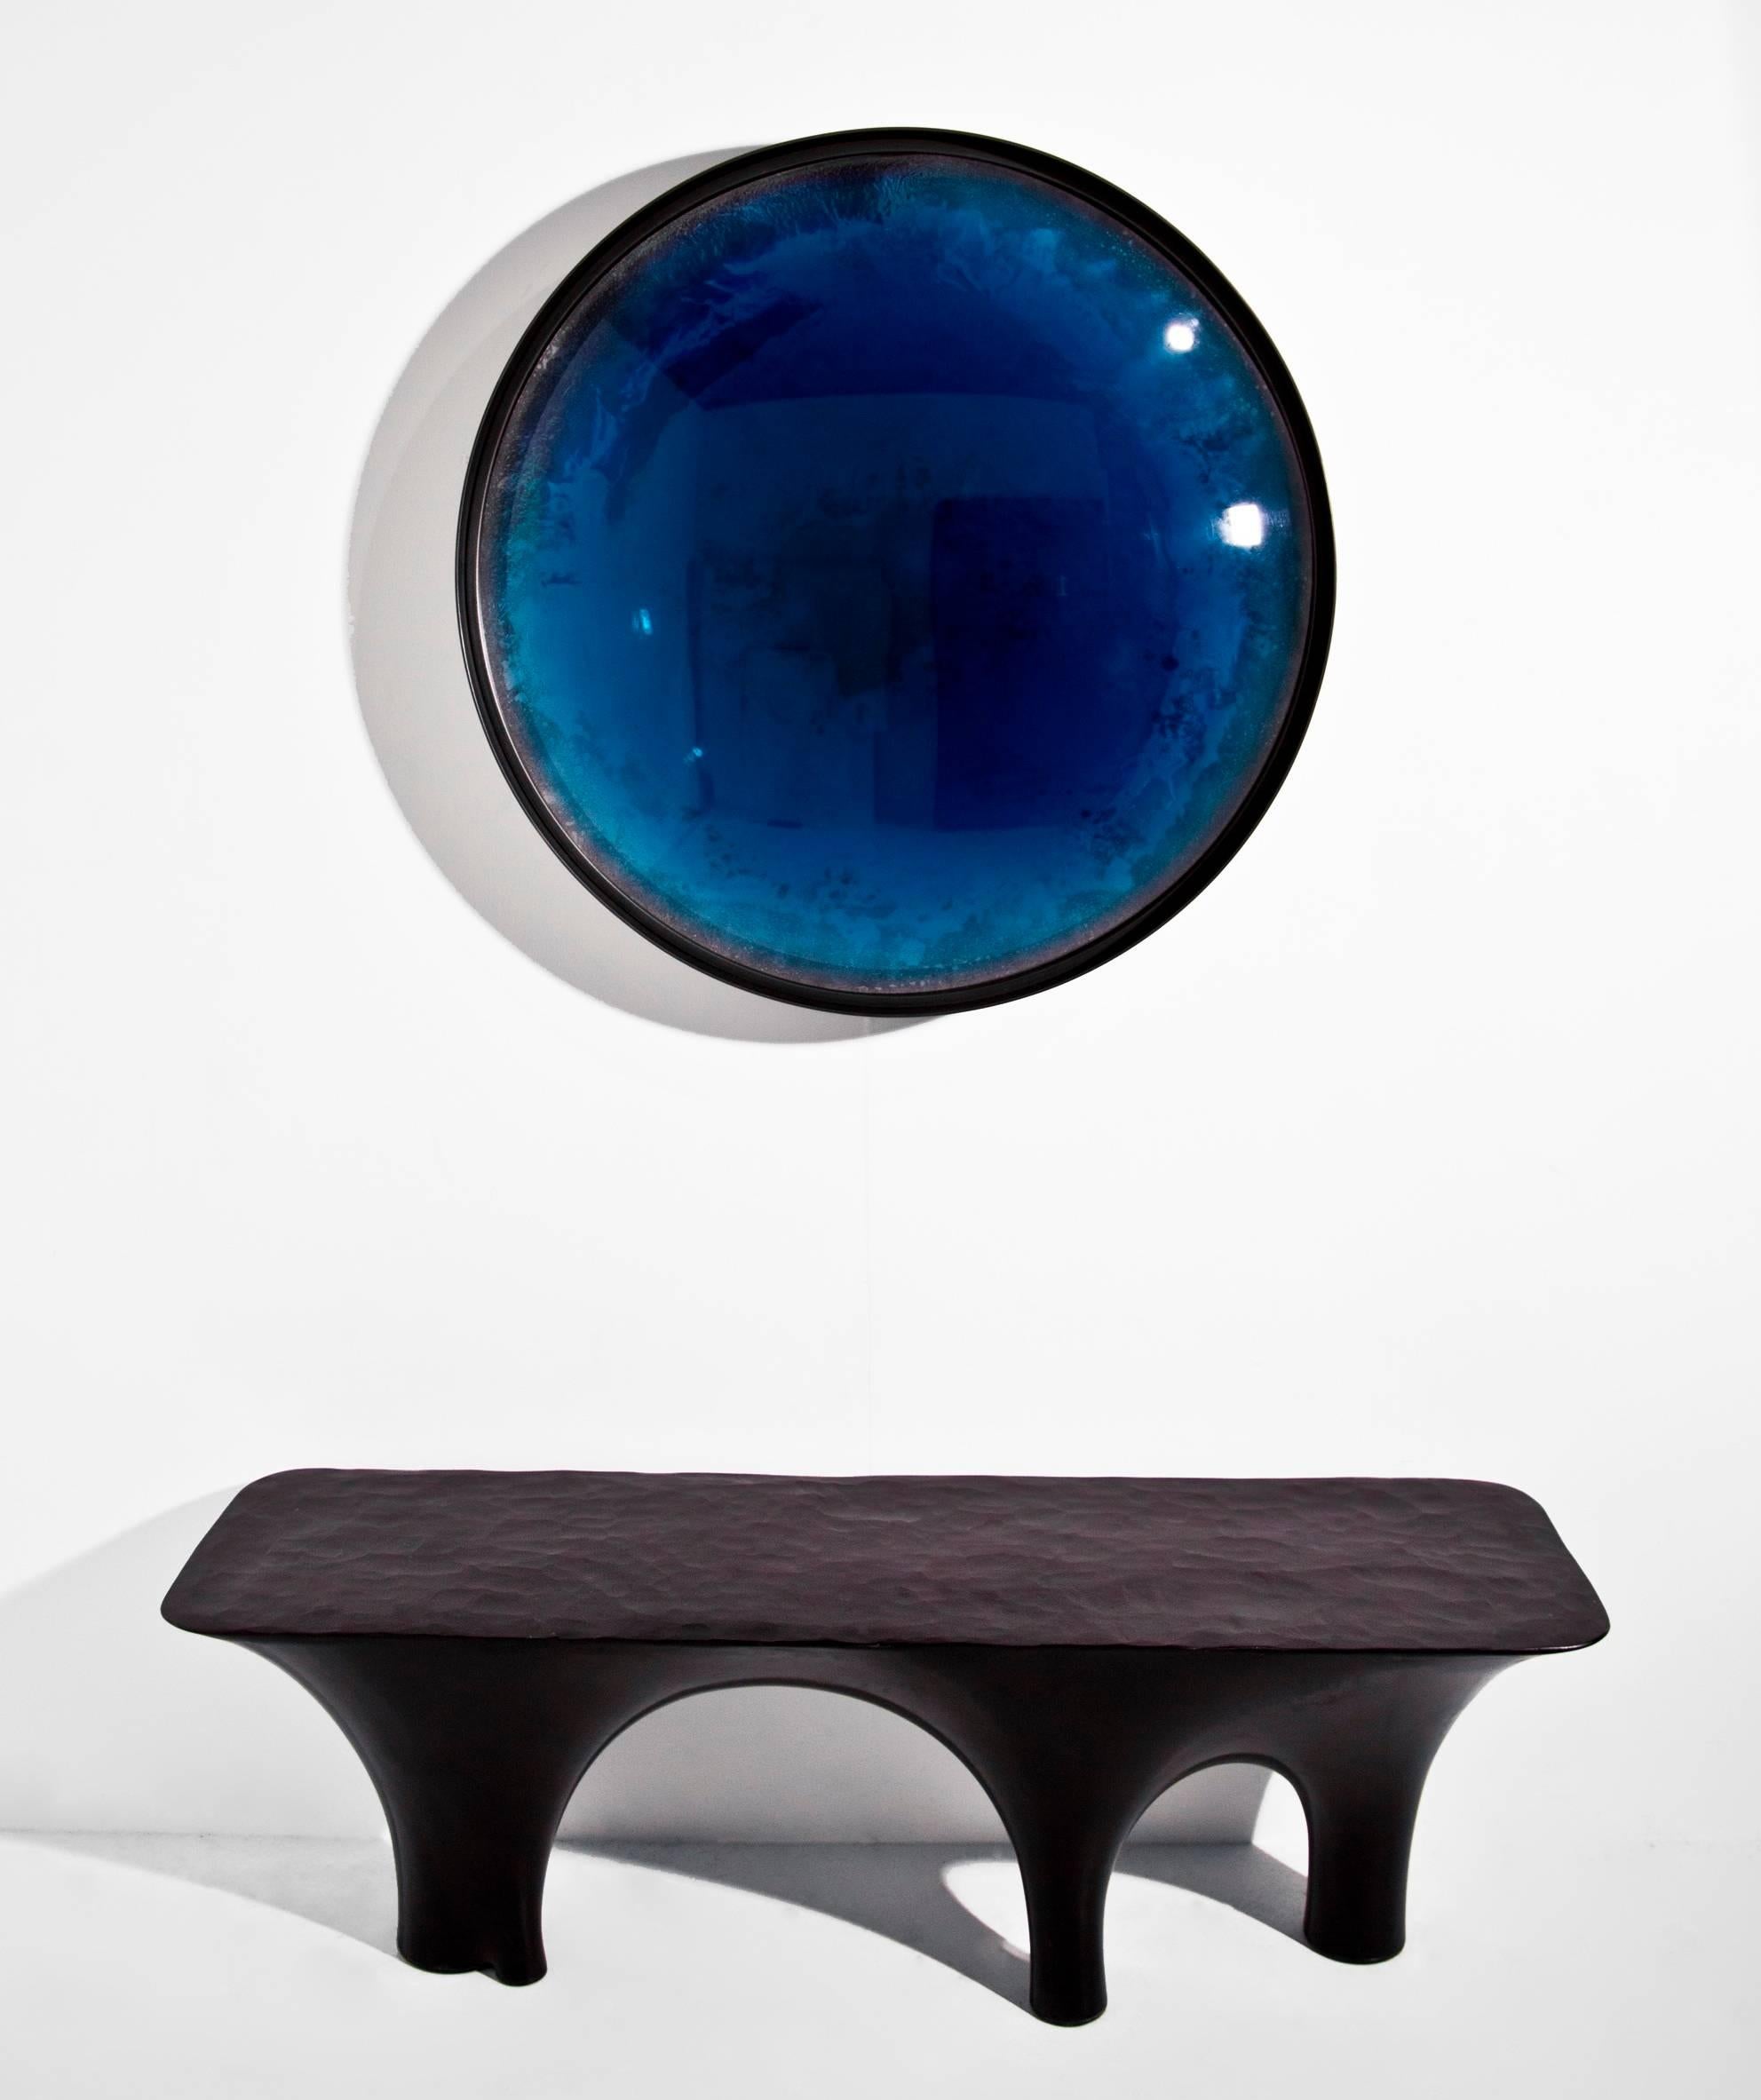 The Ionian Iris is unique on the market. It is a lens cast in translucent, cerulean blue tinted resin, layered over a hand silvered panel, set within a patinated steel frame. This creates a unique optical effect, magnifying and manipulating the